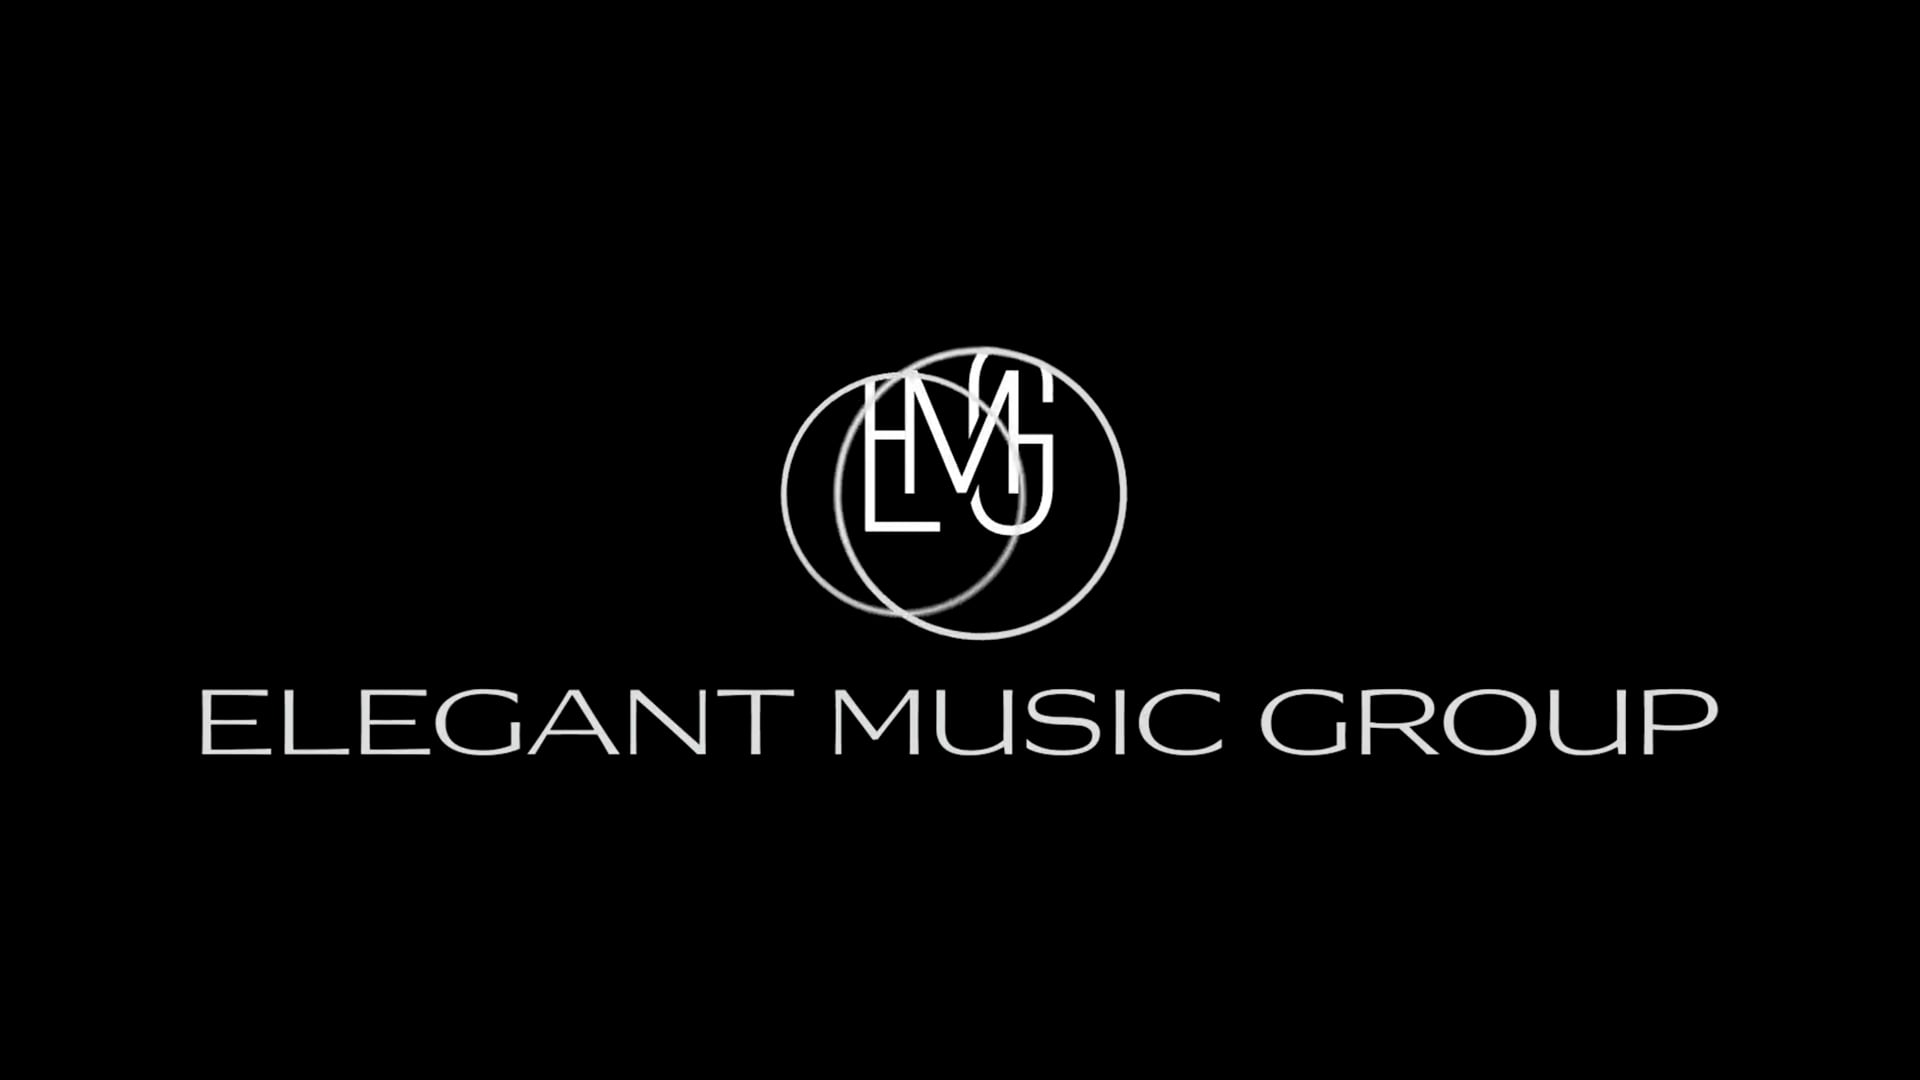 A Night with Elegant Music Group